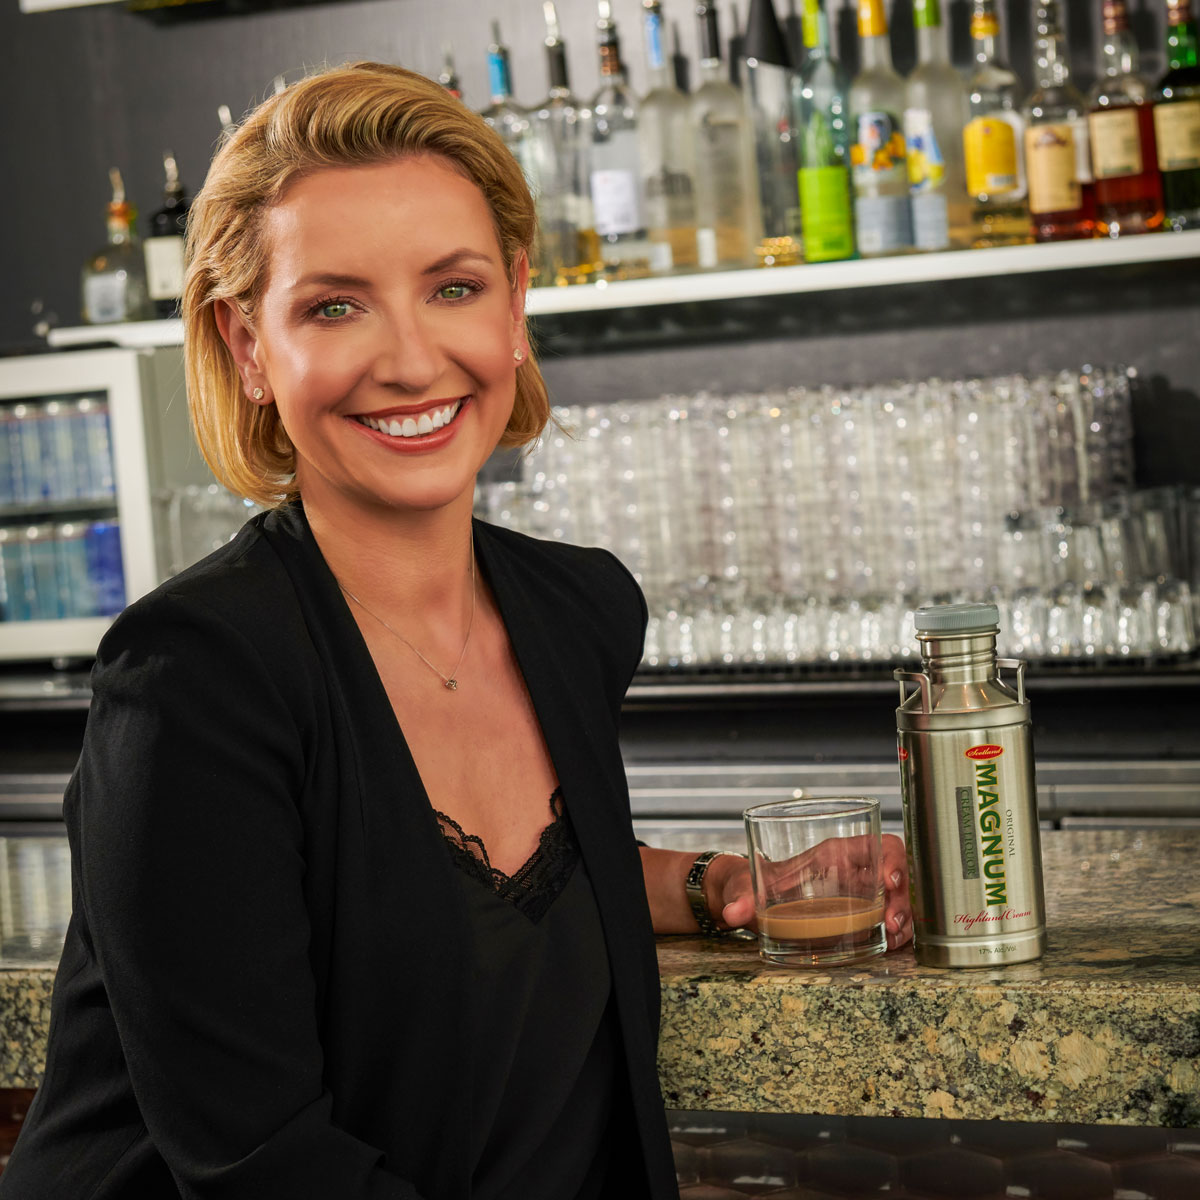 Glamorous blonde woman stands smiling at a bar